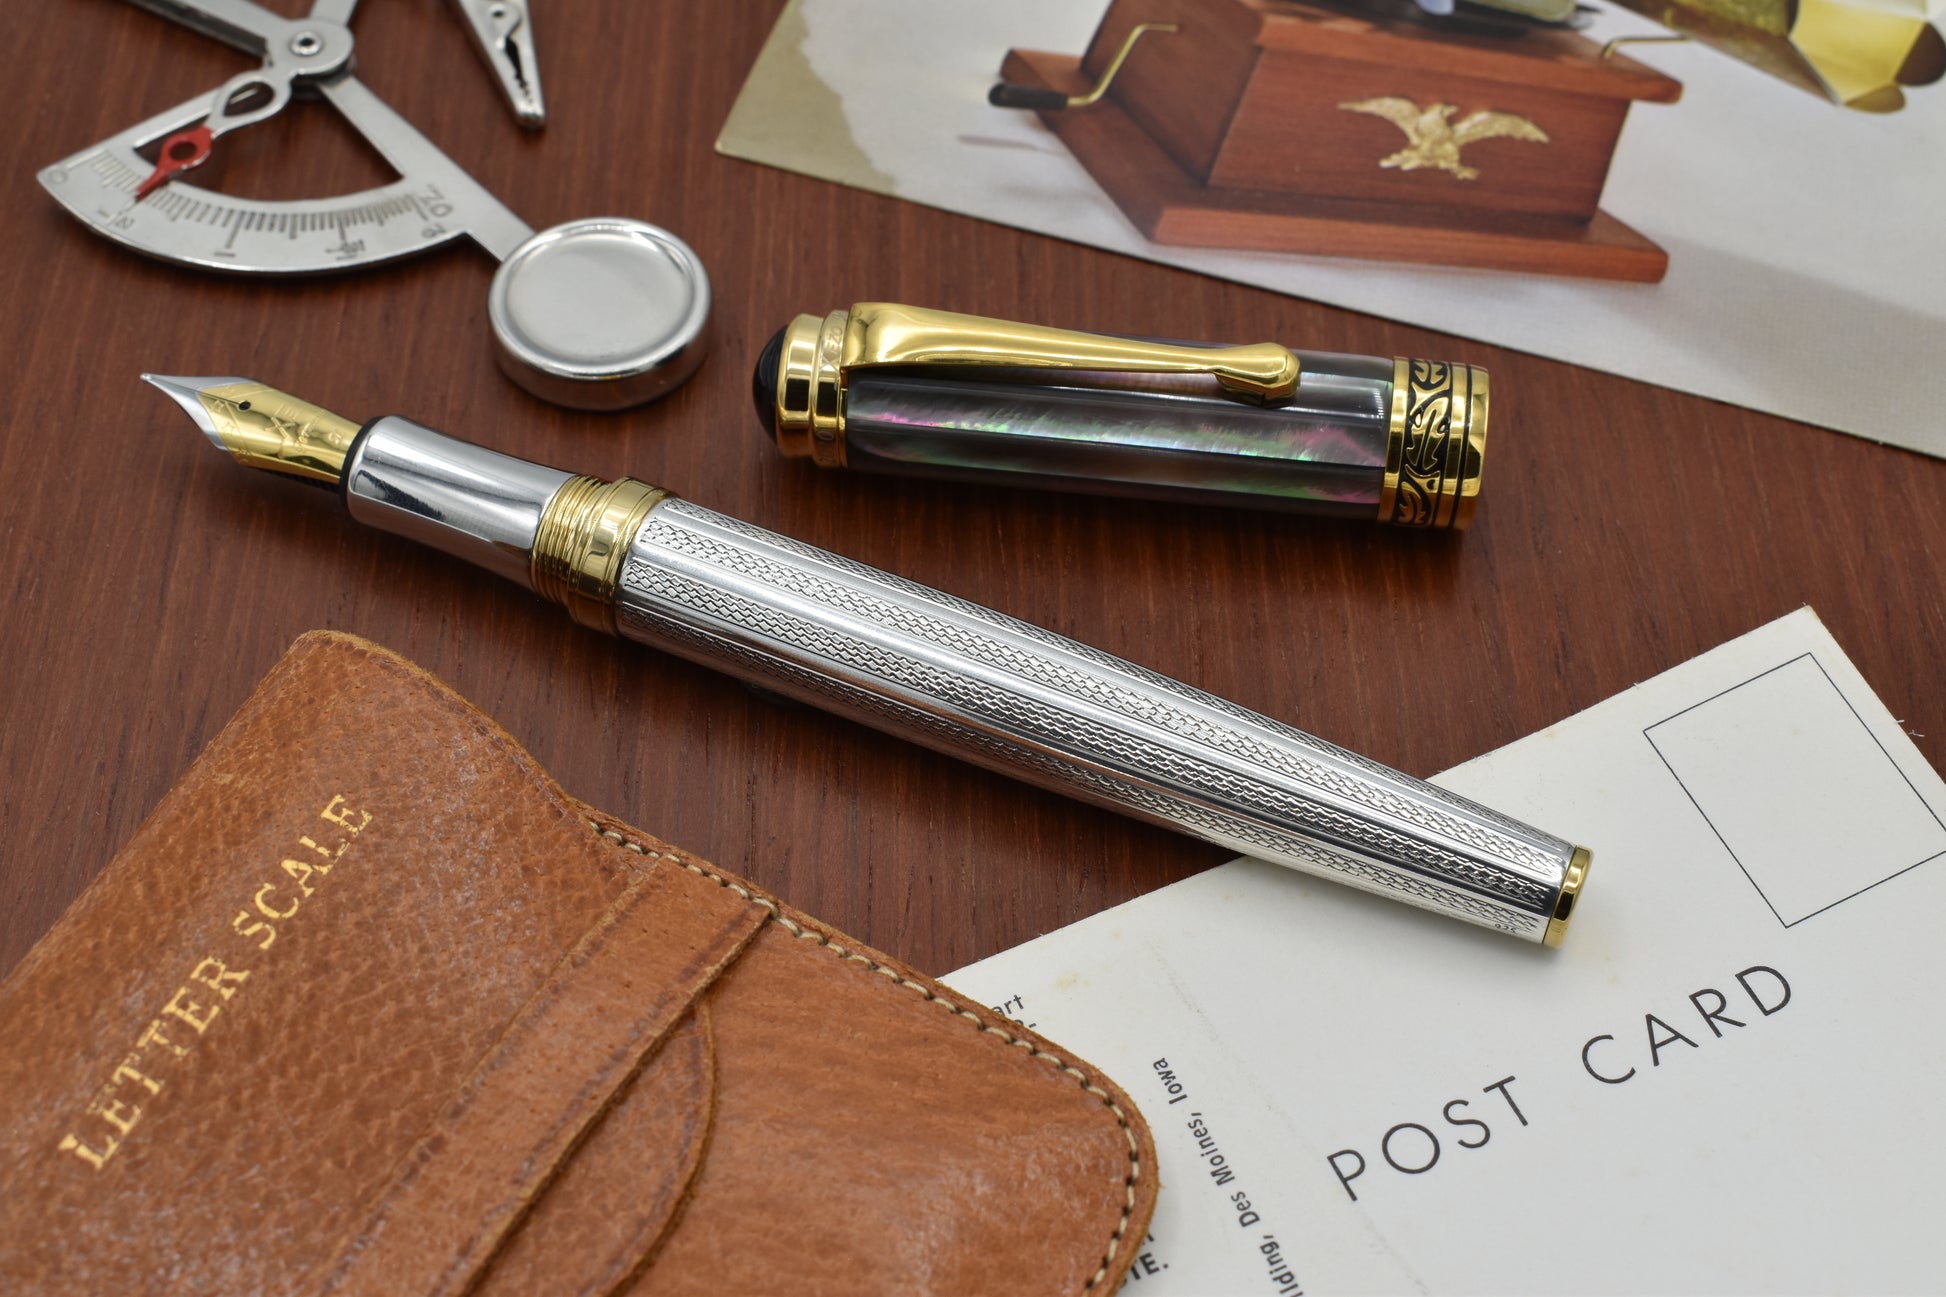 Maestro 925 BL MOP FMG Fountain pen with vintage letter scale and post cards